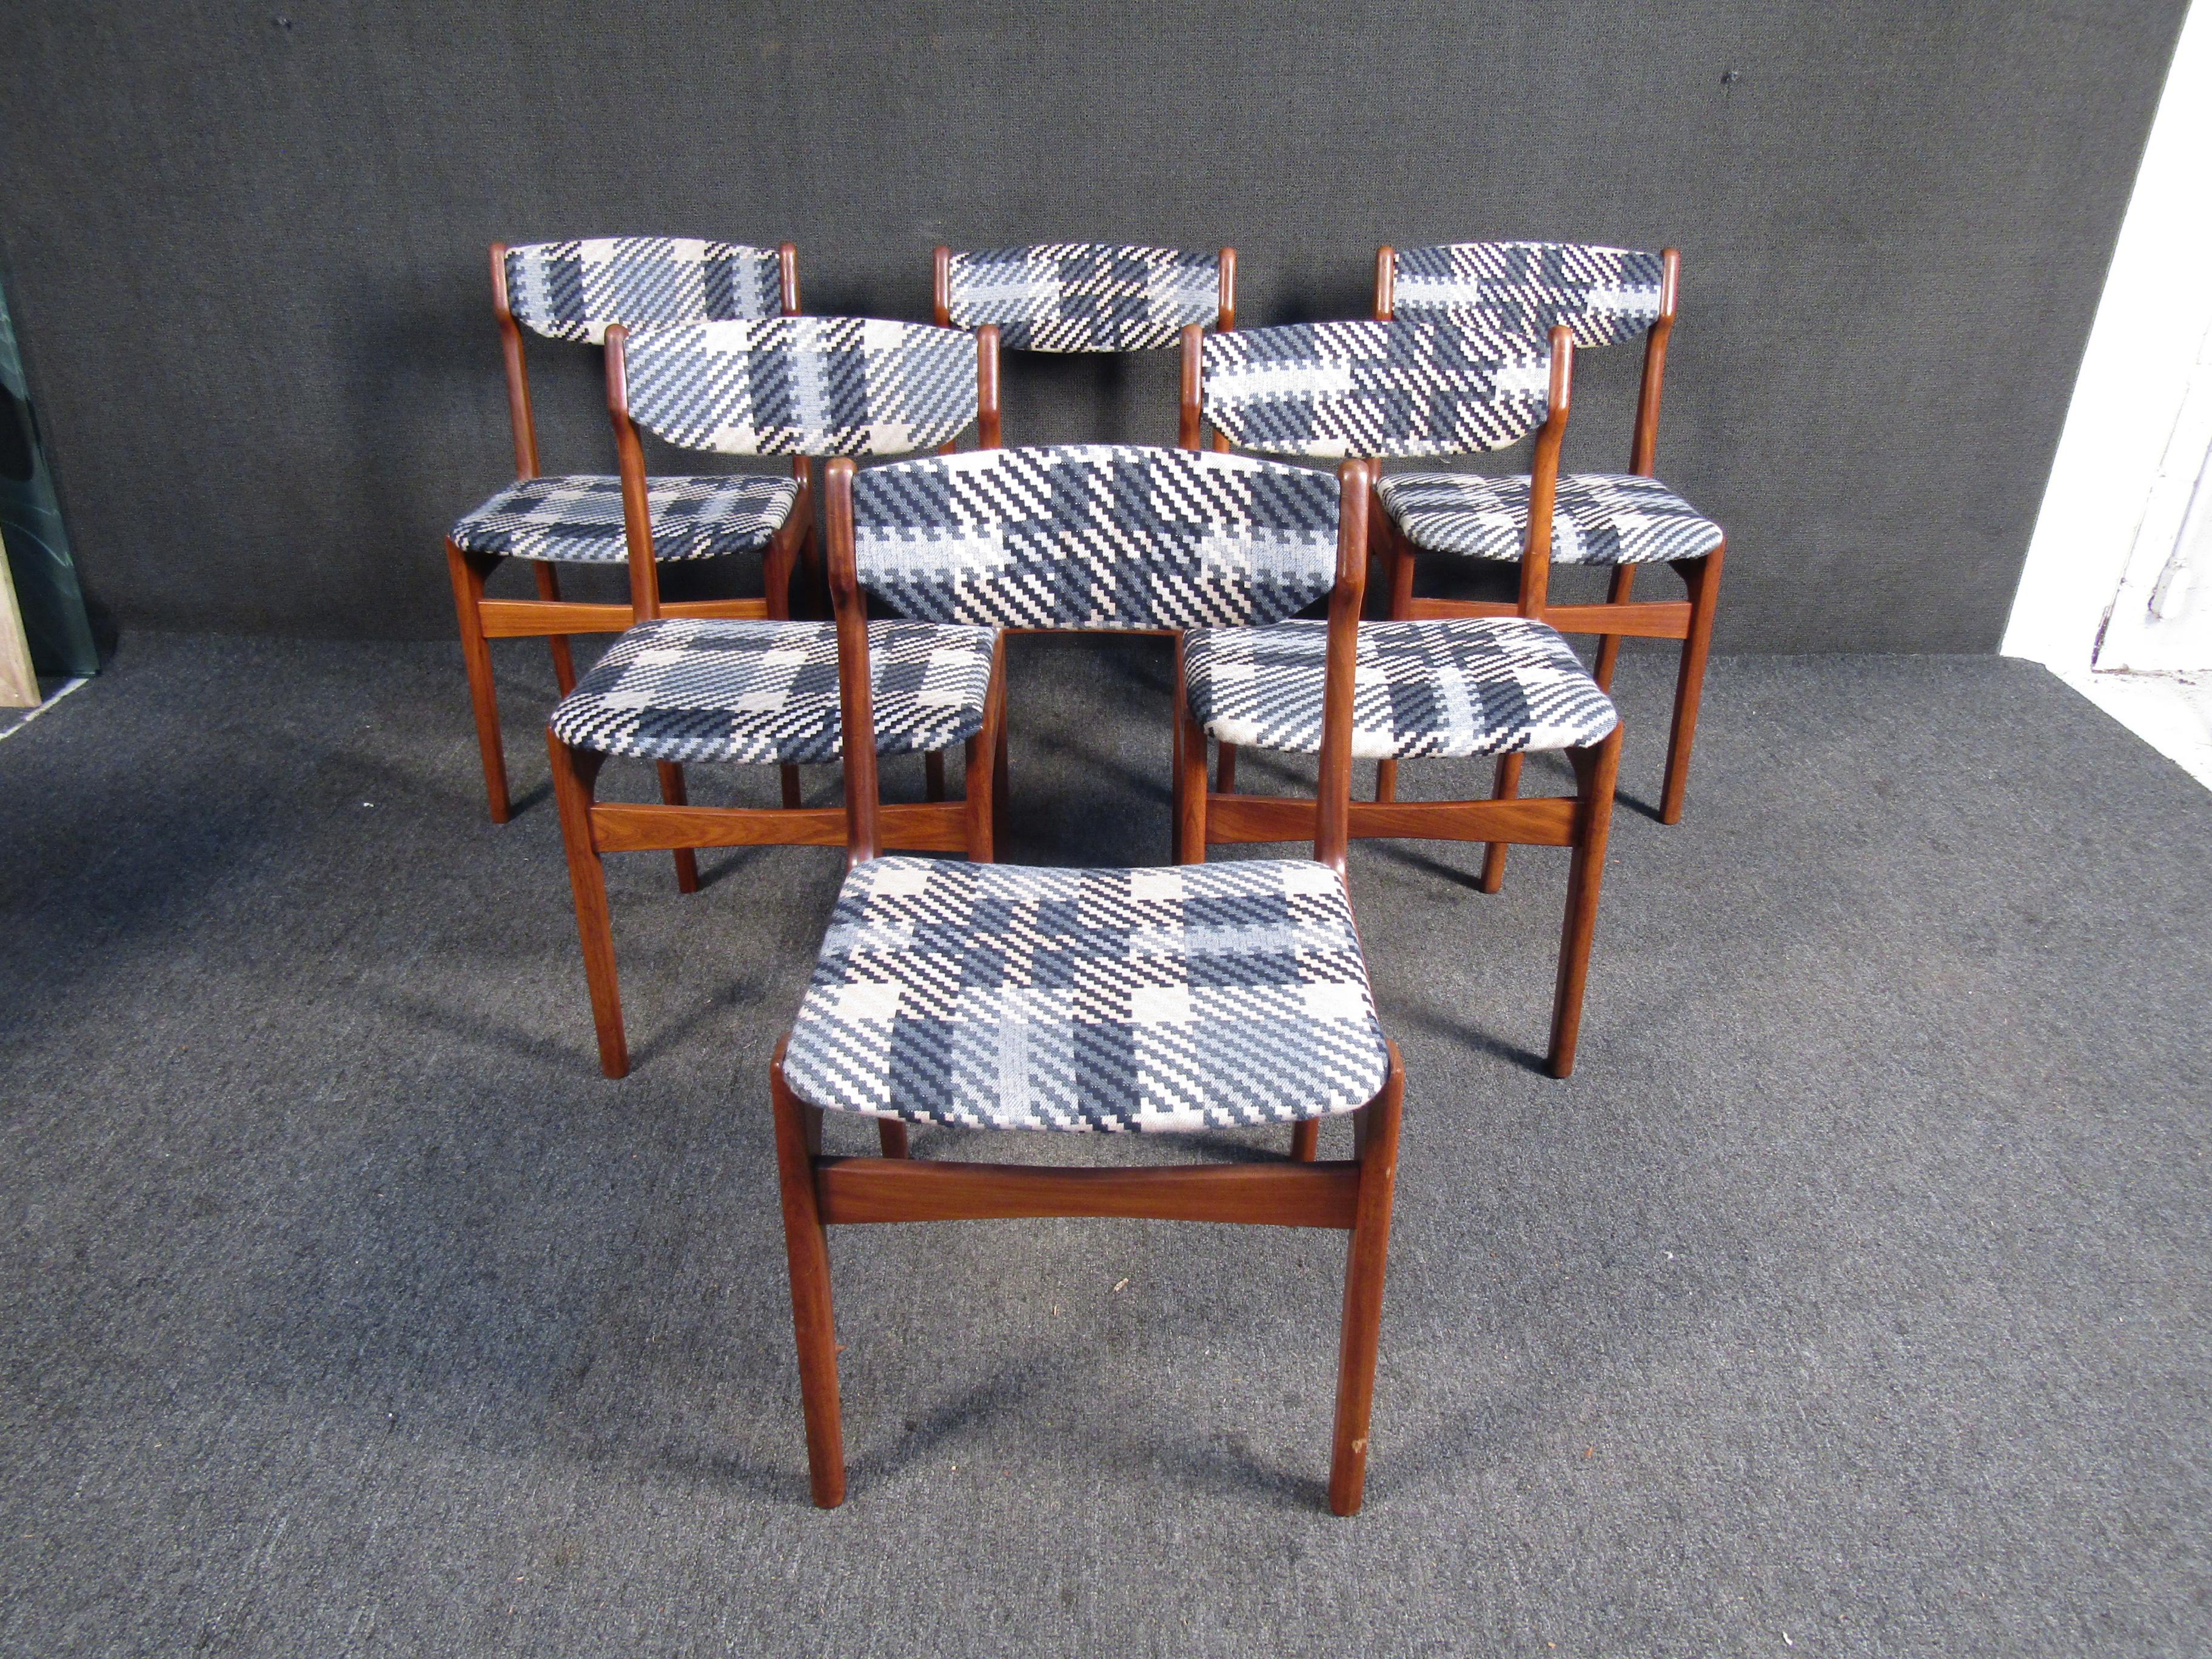 This stunning set of six vintage modern chairs are covered in a plaid fabric. A sleek and comfortable design with a sturdy teak frame. This lovely set of Danish modern dining chairs make the perfect addition to any modern interior. 

Please